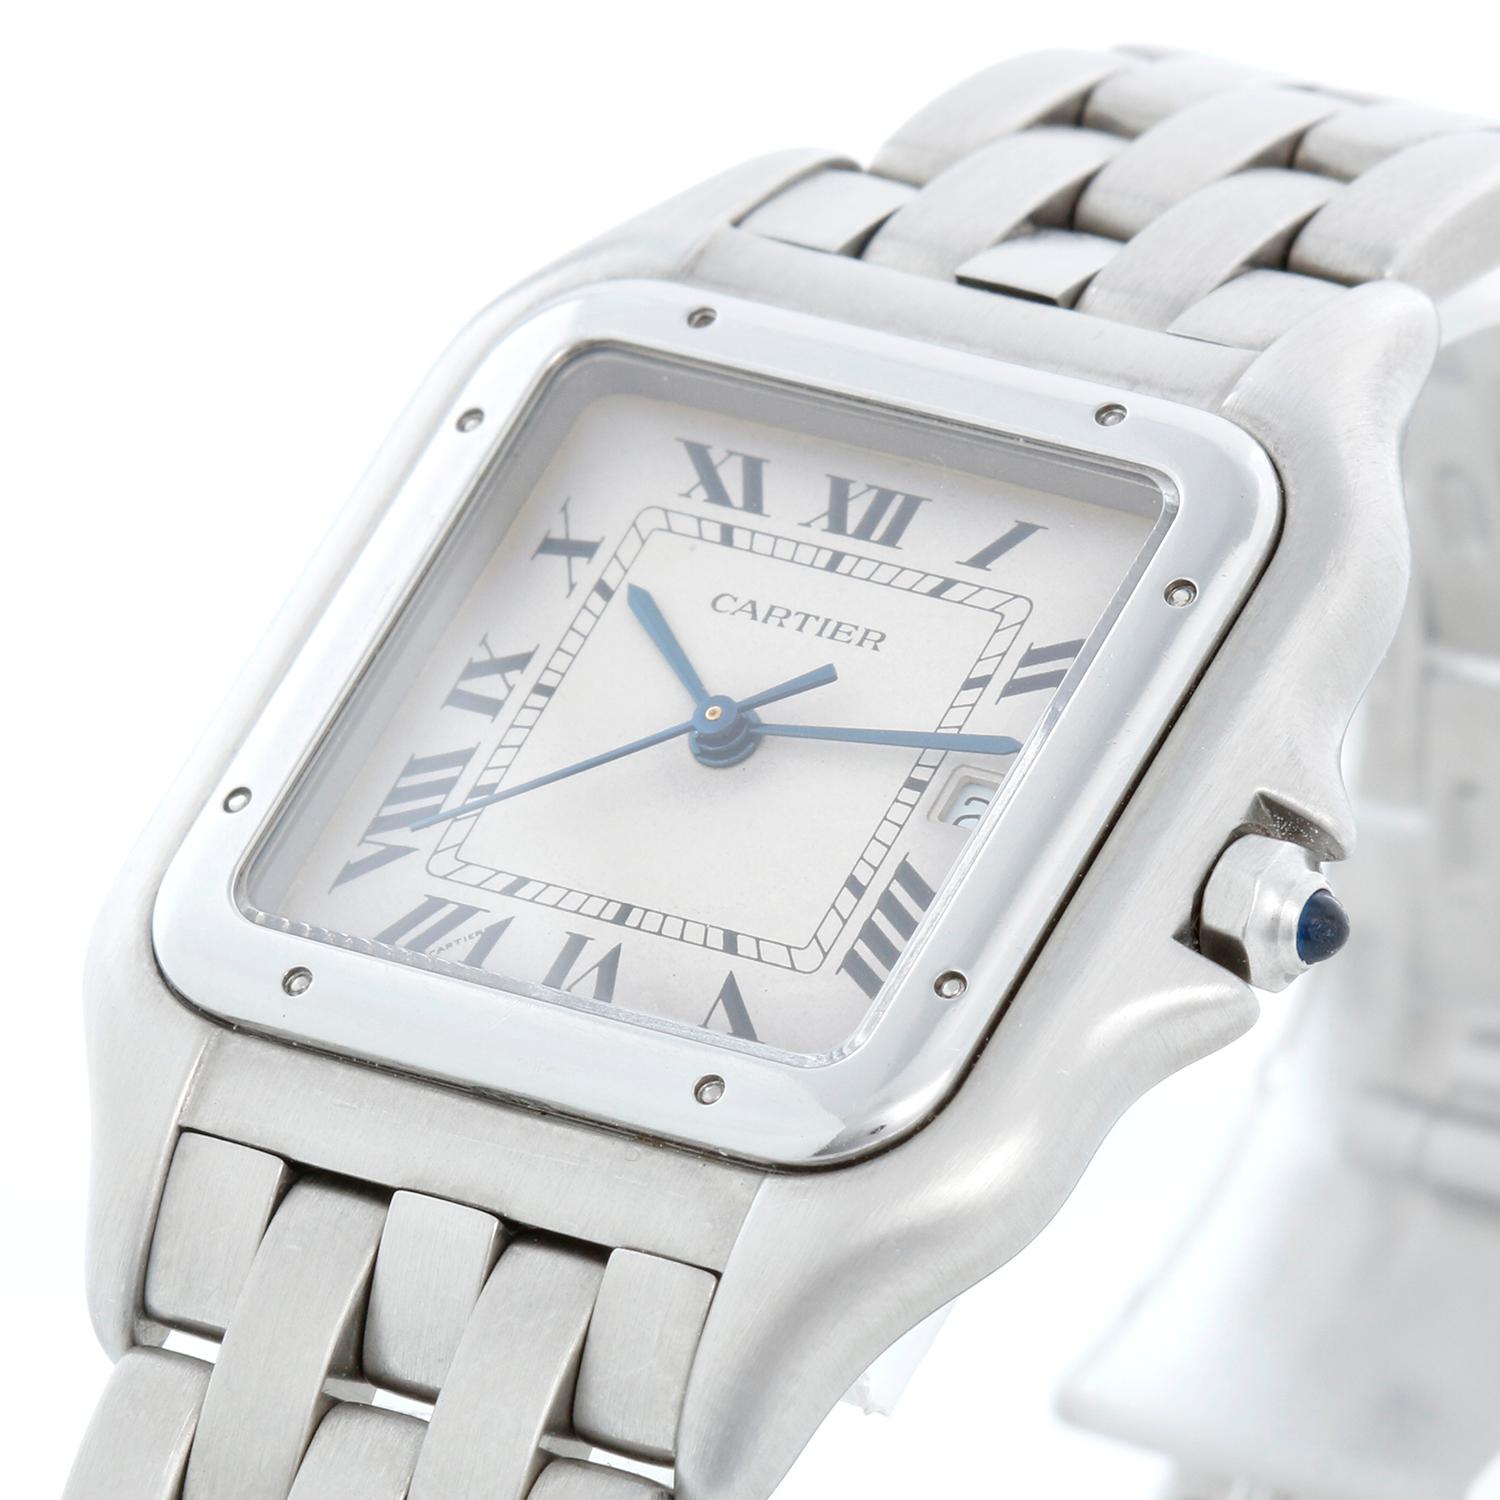 Cartier Jumbo Panther Stainless Steel Men's Quartz Watch with Date In Excellent Condition For Sale In Dallas, TX